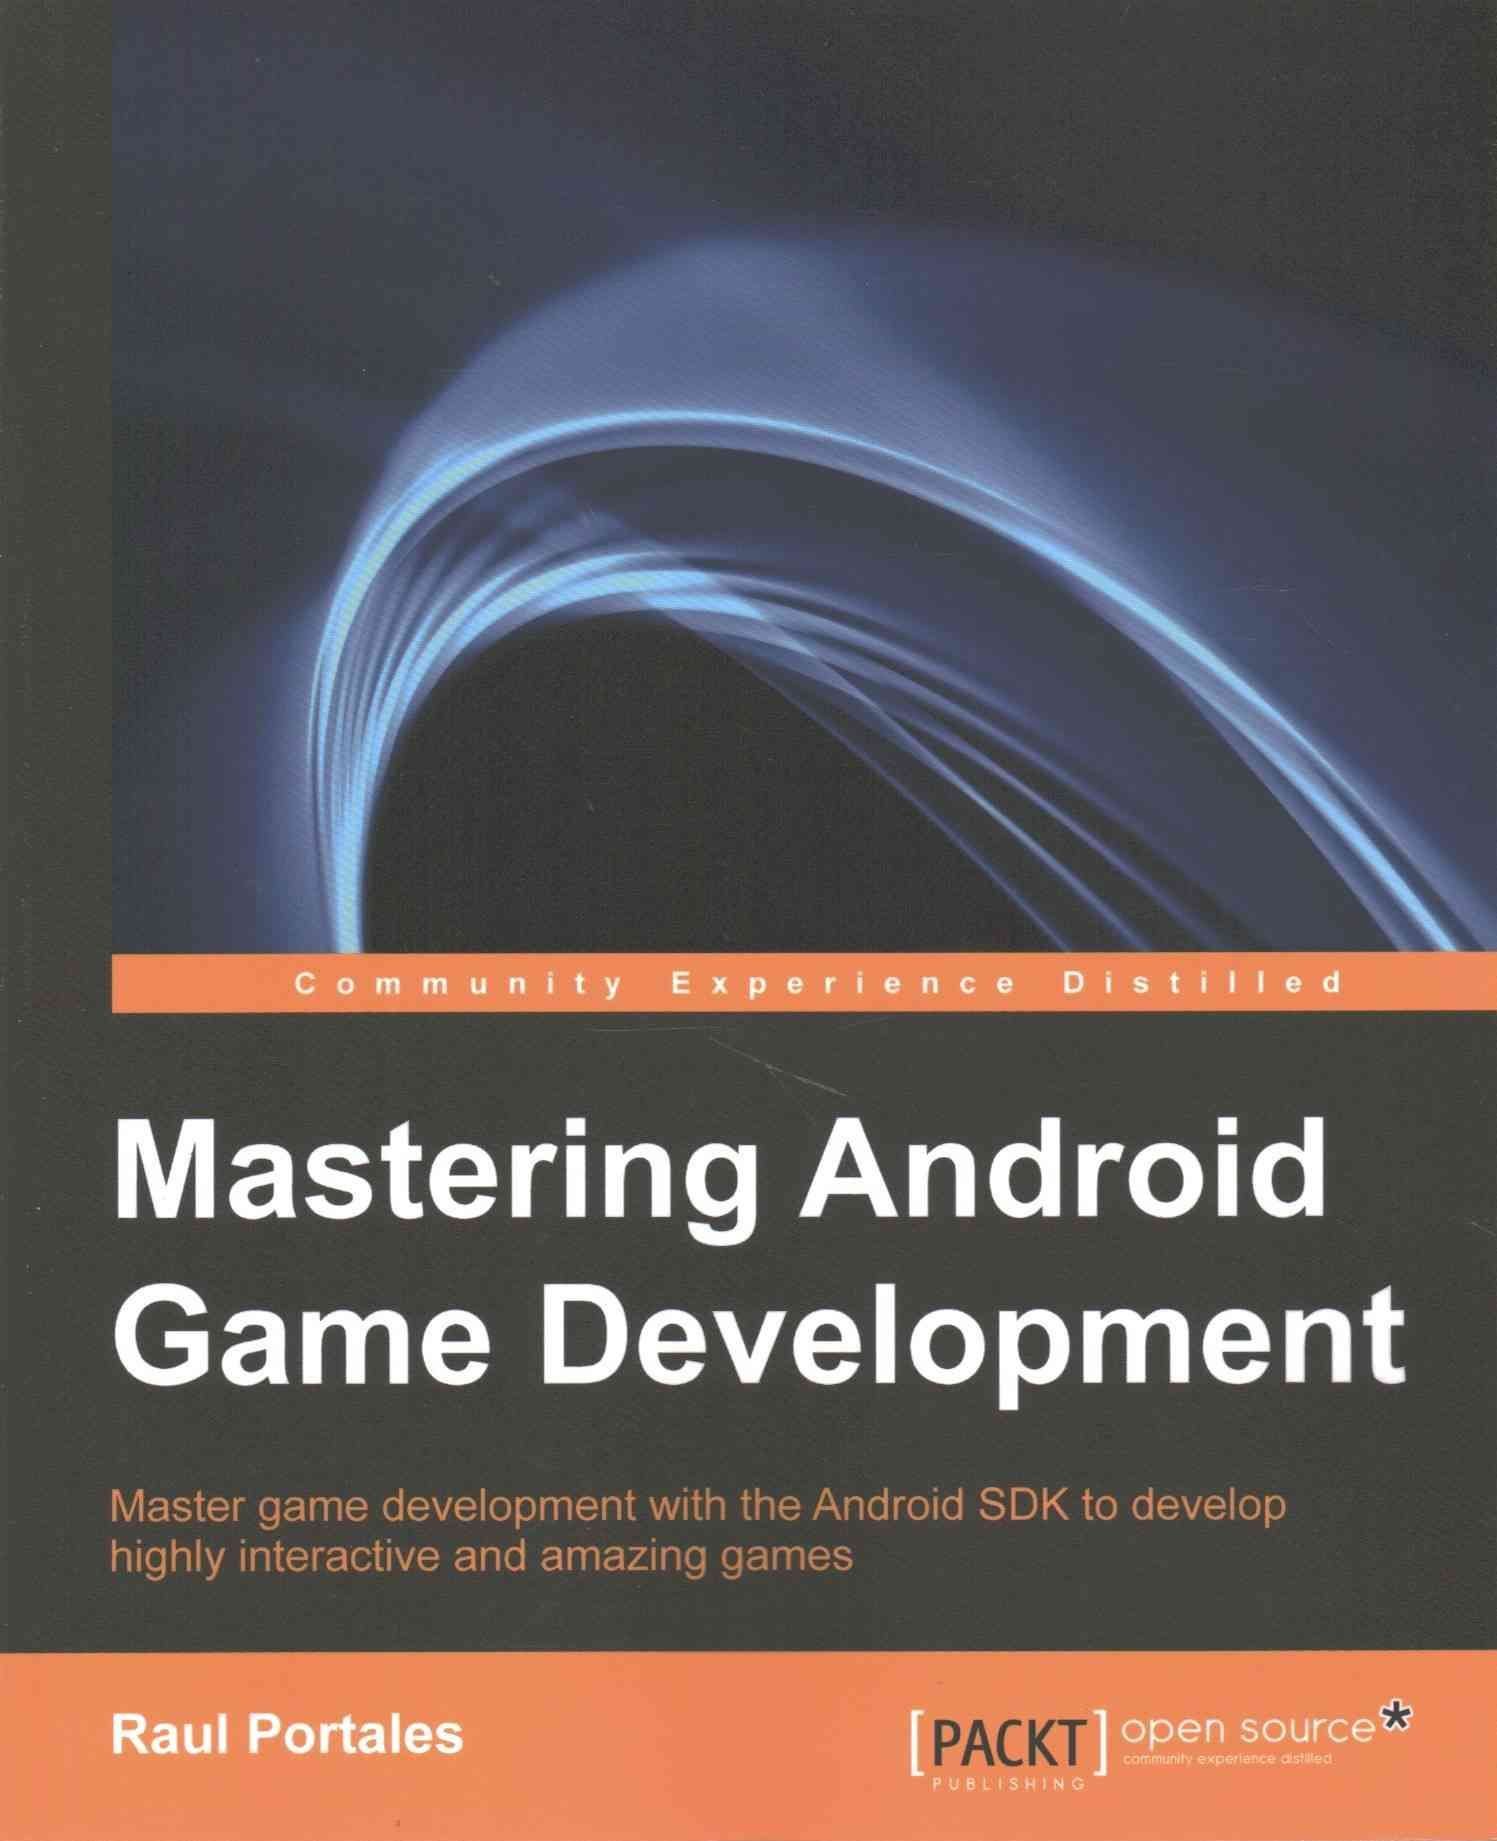 Mastering Android Game Development